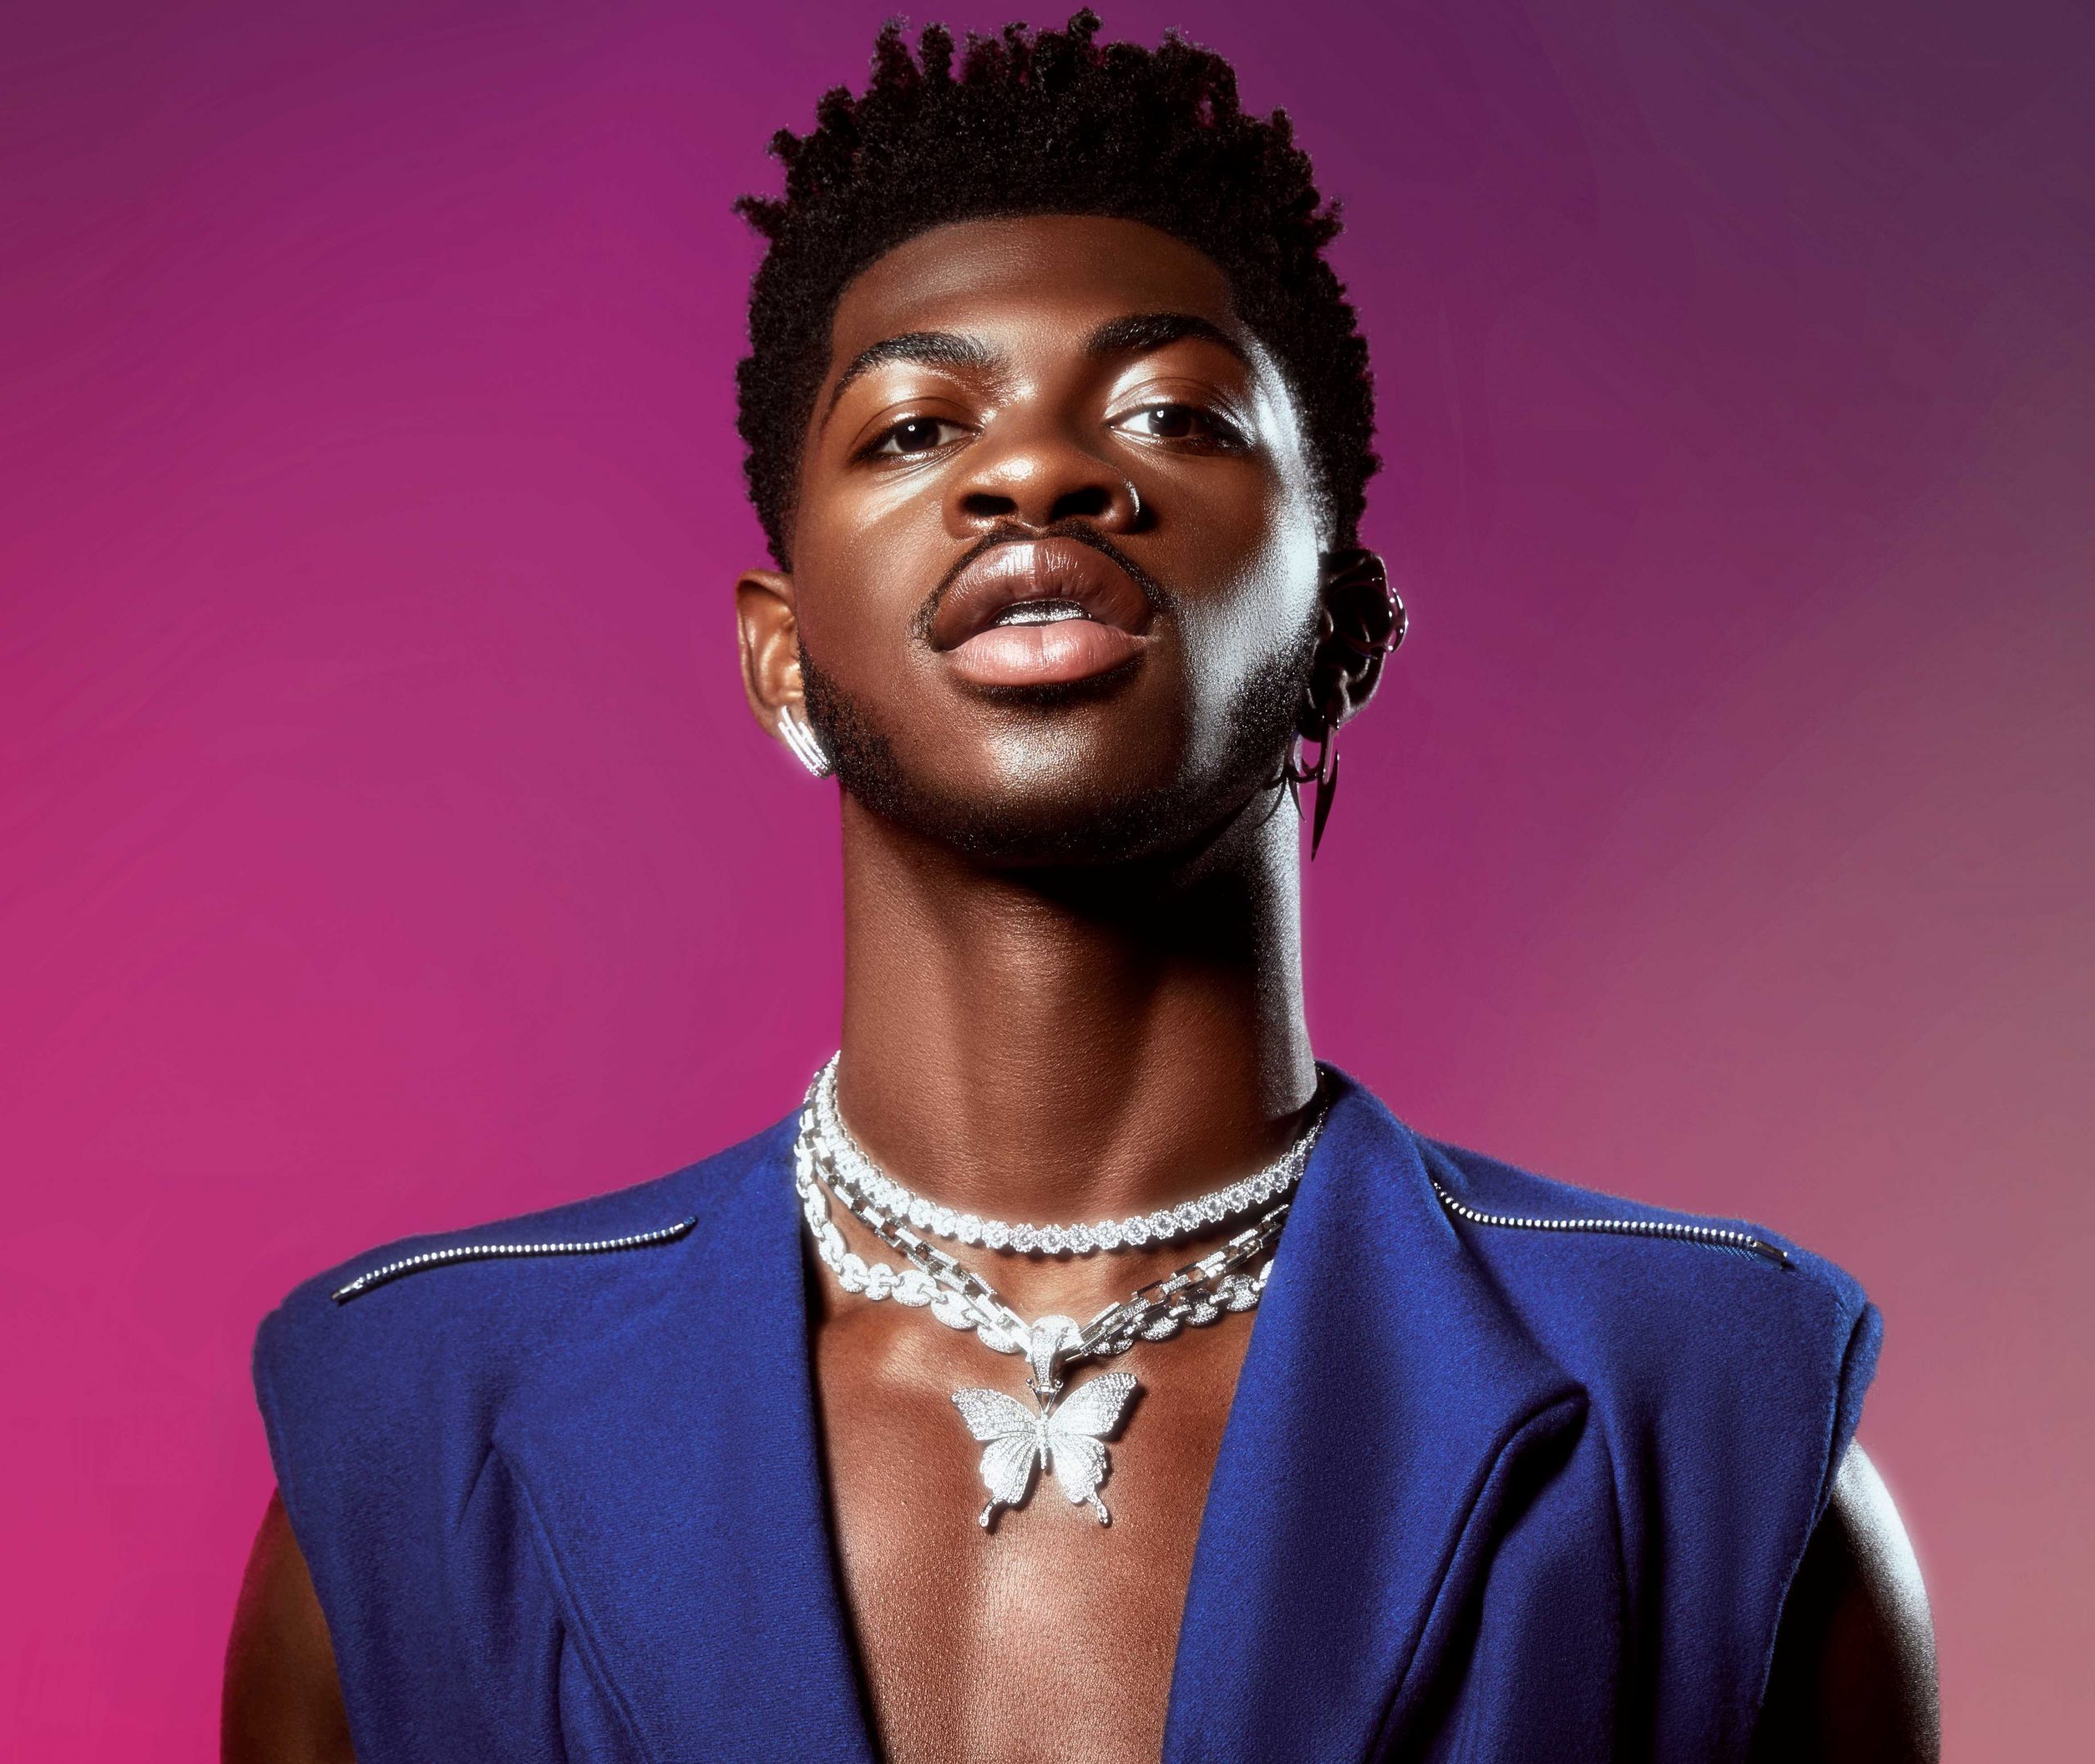 The Source |BET Responds To Lil Nas X Diss After Snubbing Him At Awards Show